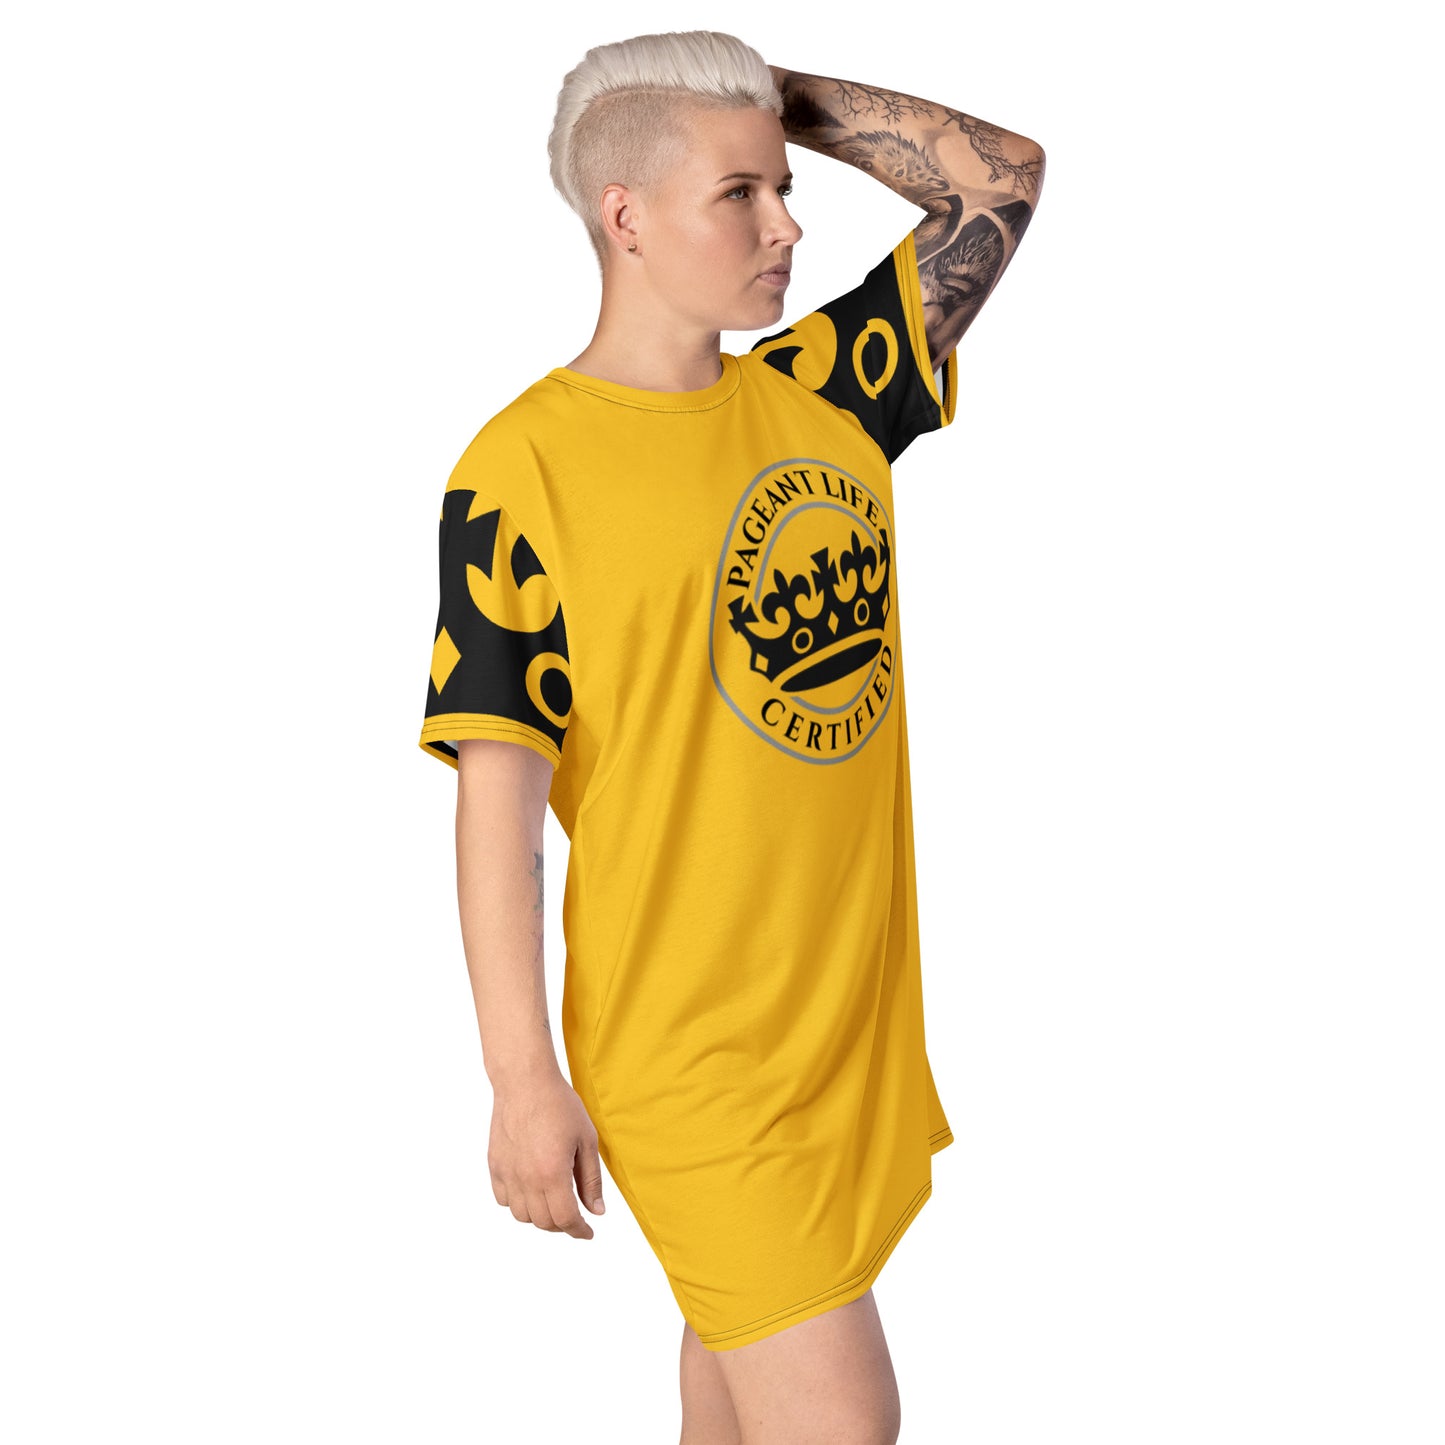 Black and Yellow Pageant Life Certified T-shirt dress